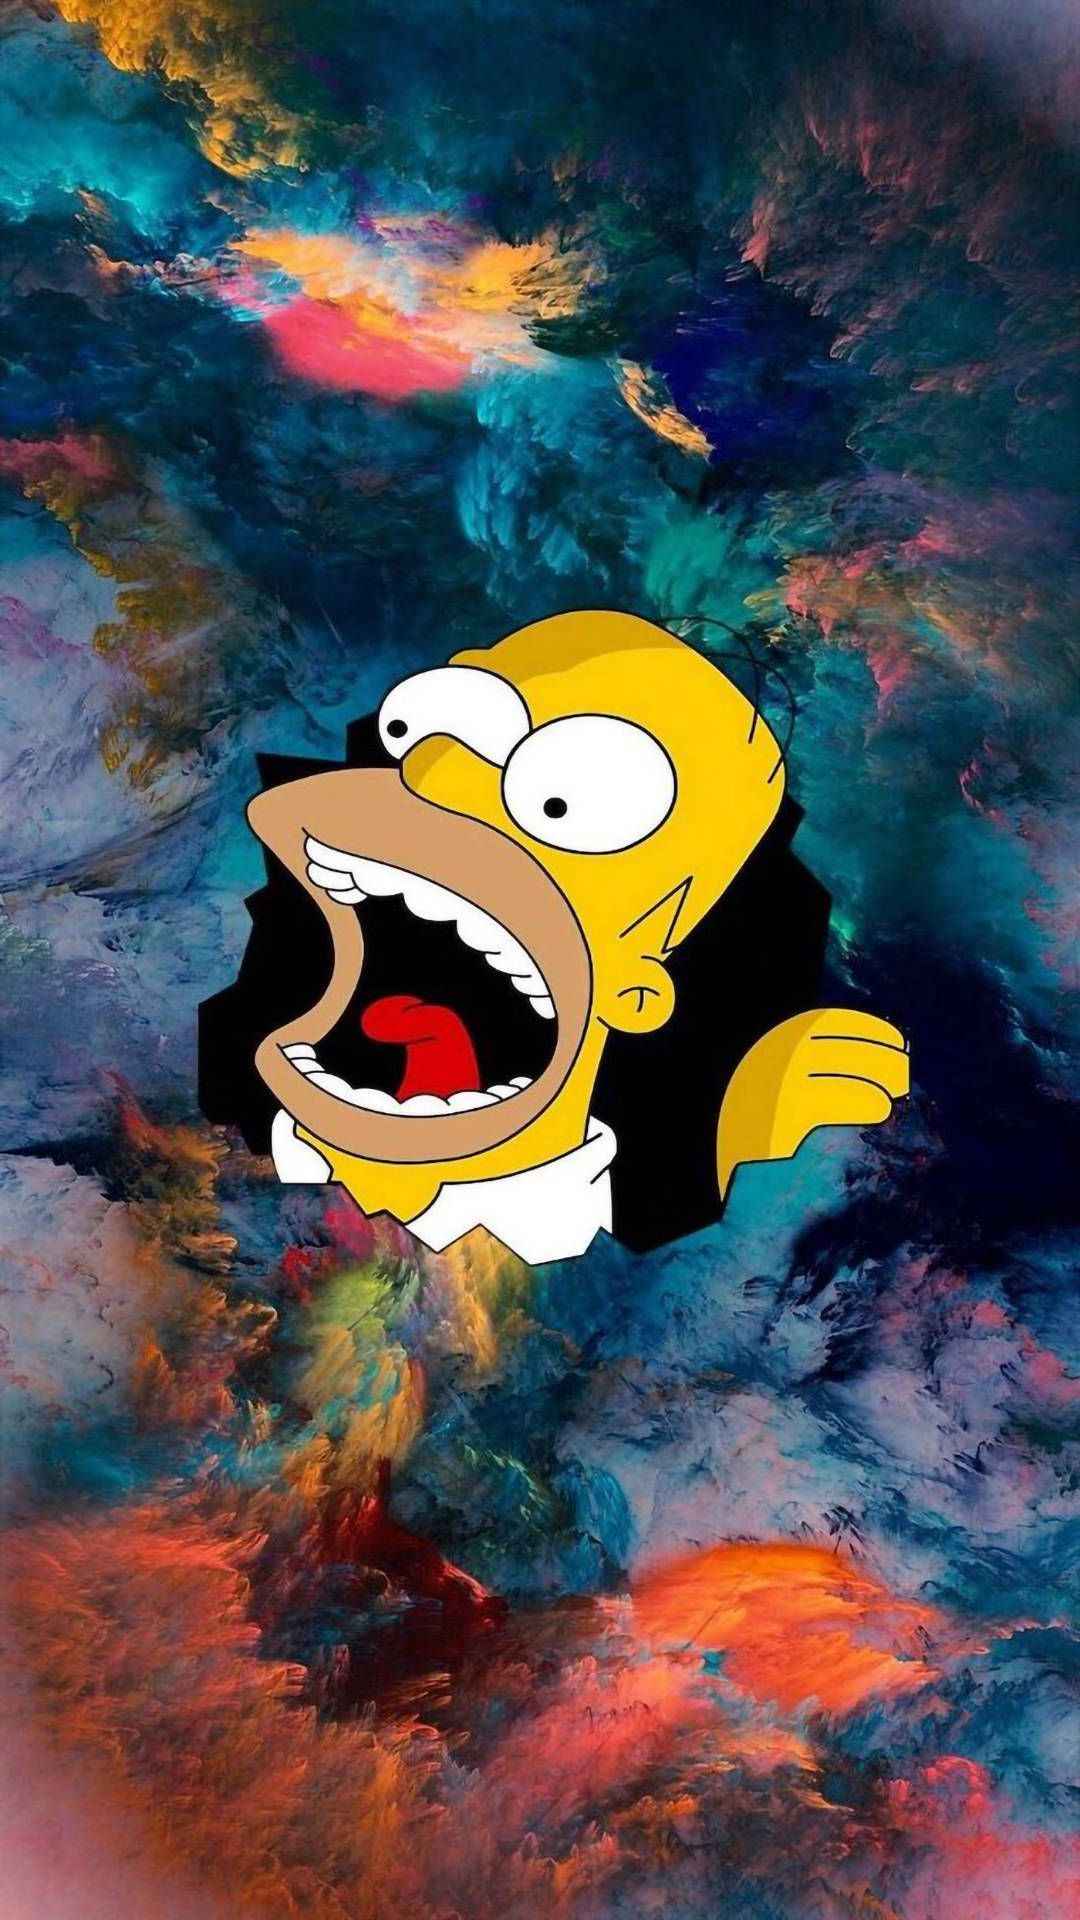 Homer Simpson iPhone Wallpaper with high-resolution 1080x1920 pixel. You can use this wallpaper for your iPhone 5, 6, 7, 8, X, XS, XR backgrounds, Mobile Screensaver, or iPad Lock Screen - Homer Simpson